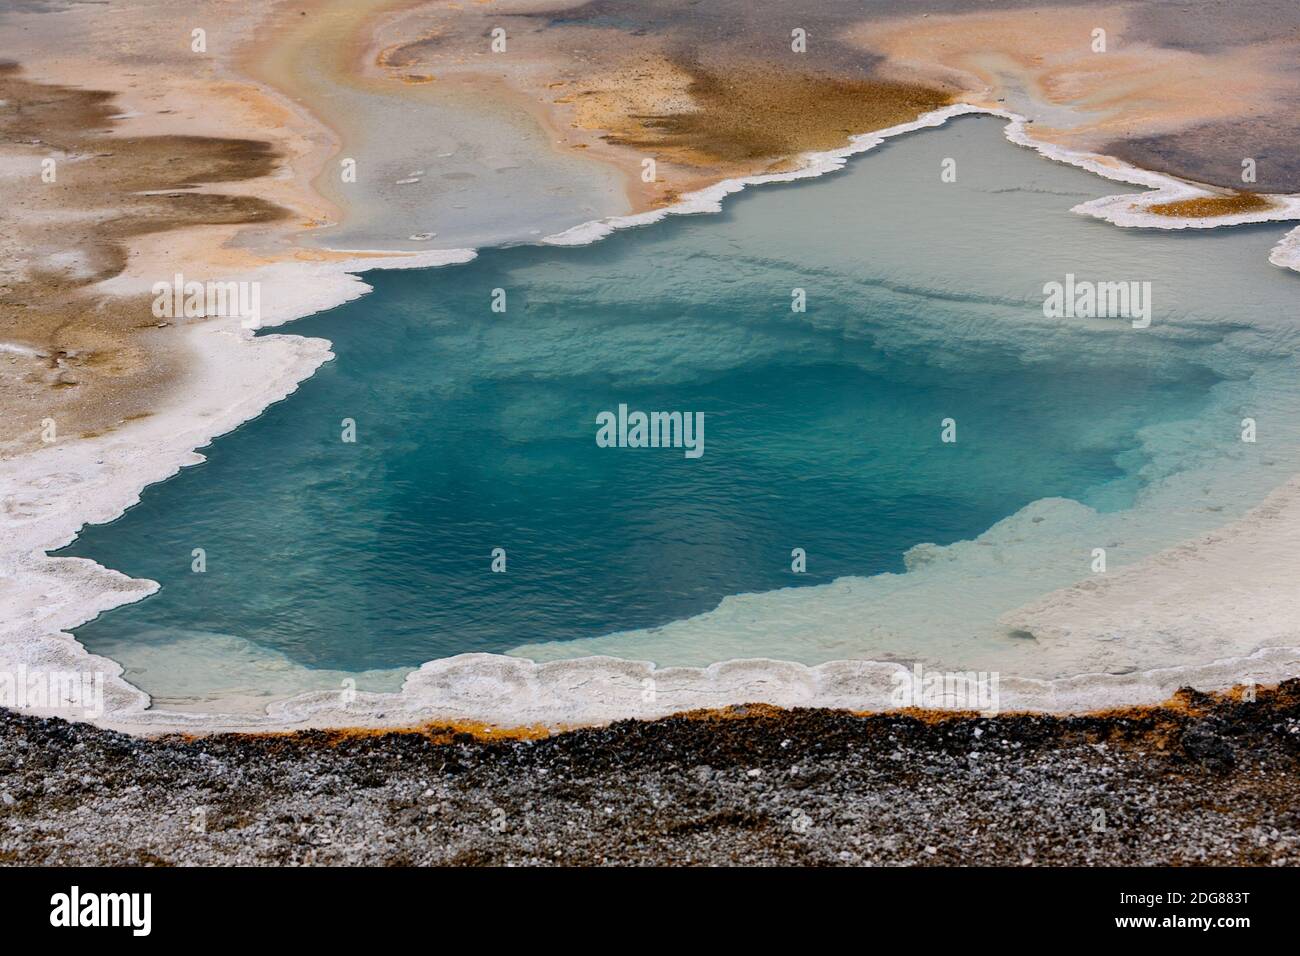 Colorful geothermal feature, Doublet Pool with scalloped geyserite deposits of opaline silica around the border, water about 190○f rare short eruption Stock Photo